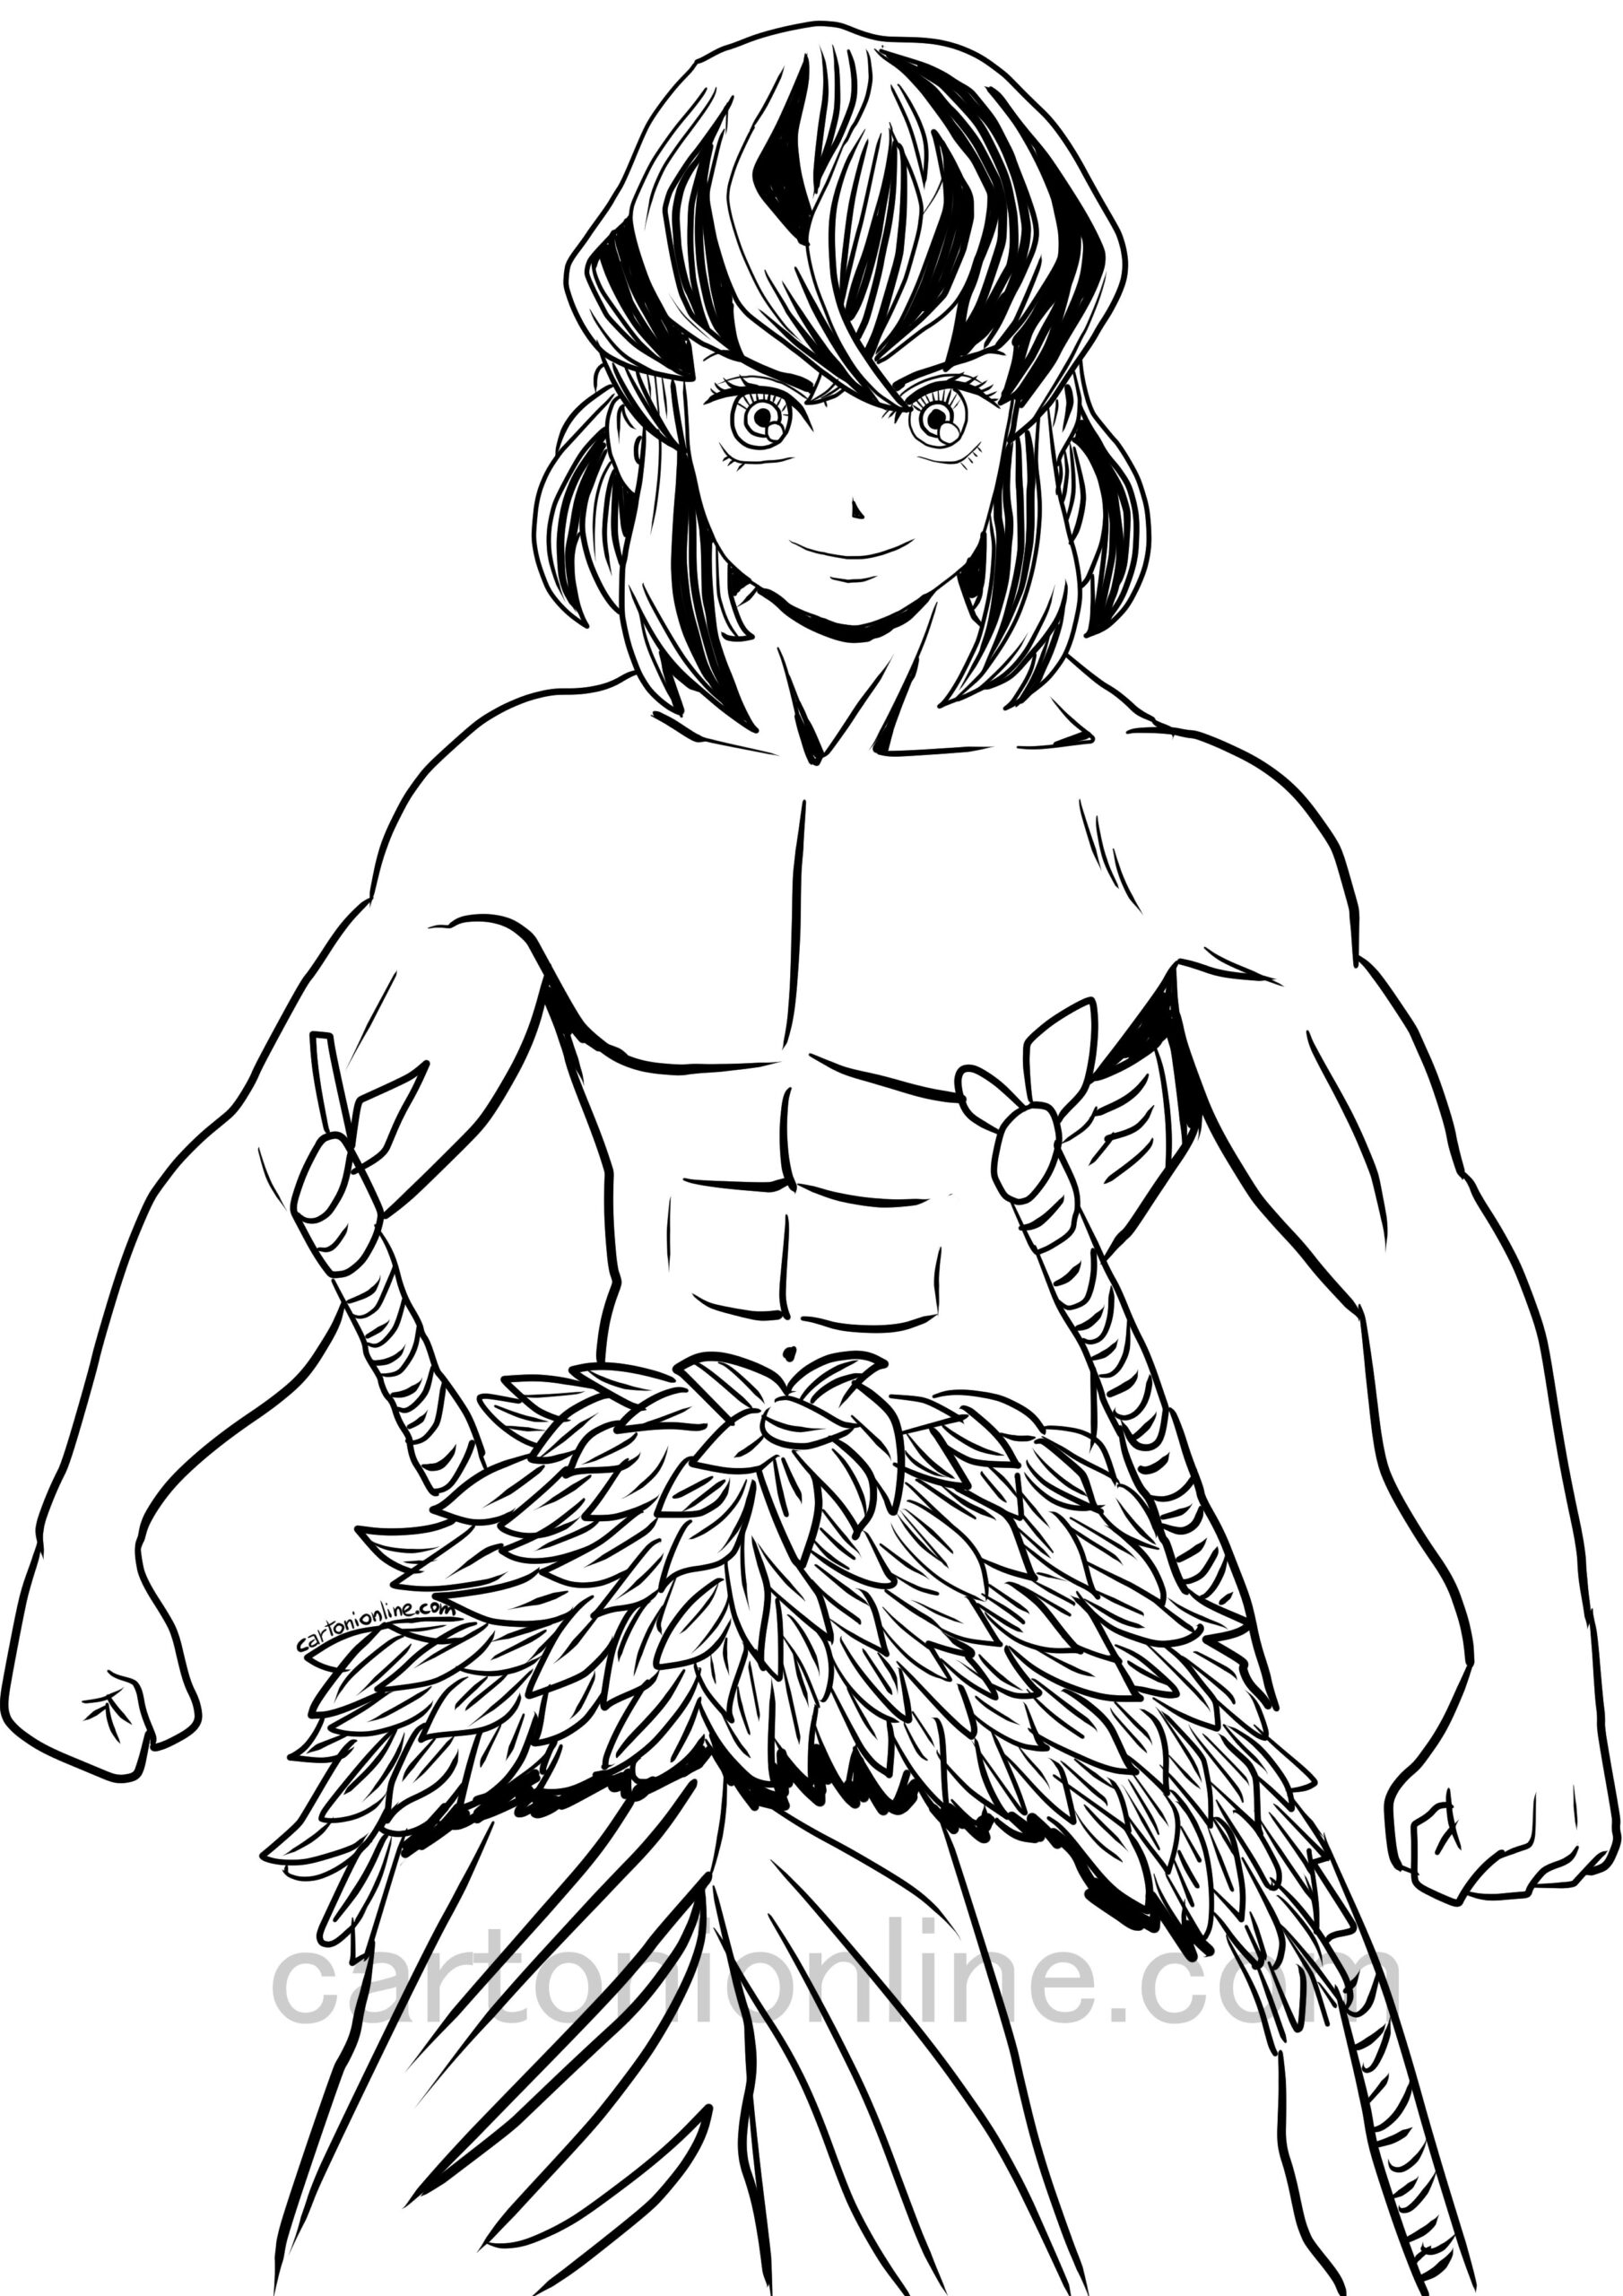 Inosuke Hashibira From Demon Slayer Coloring Page destiné Coloriages Demon Slayer